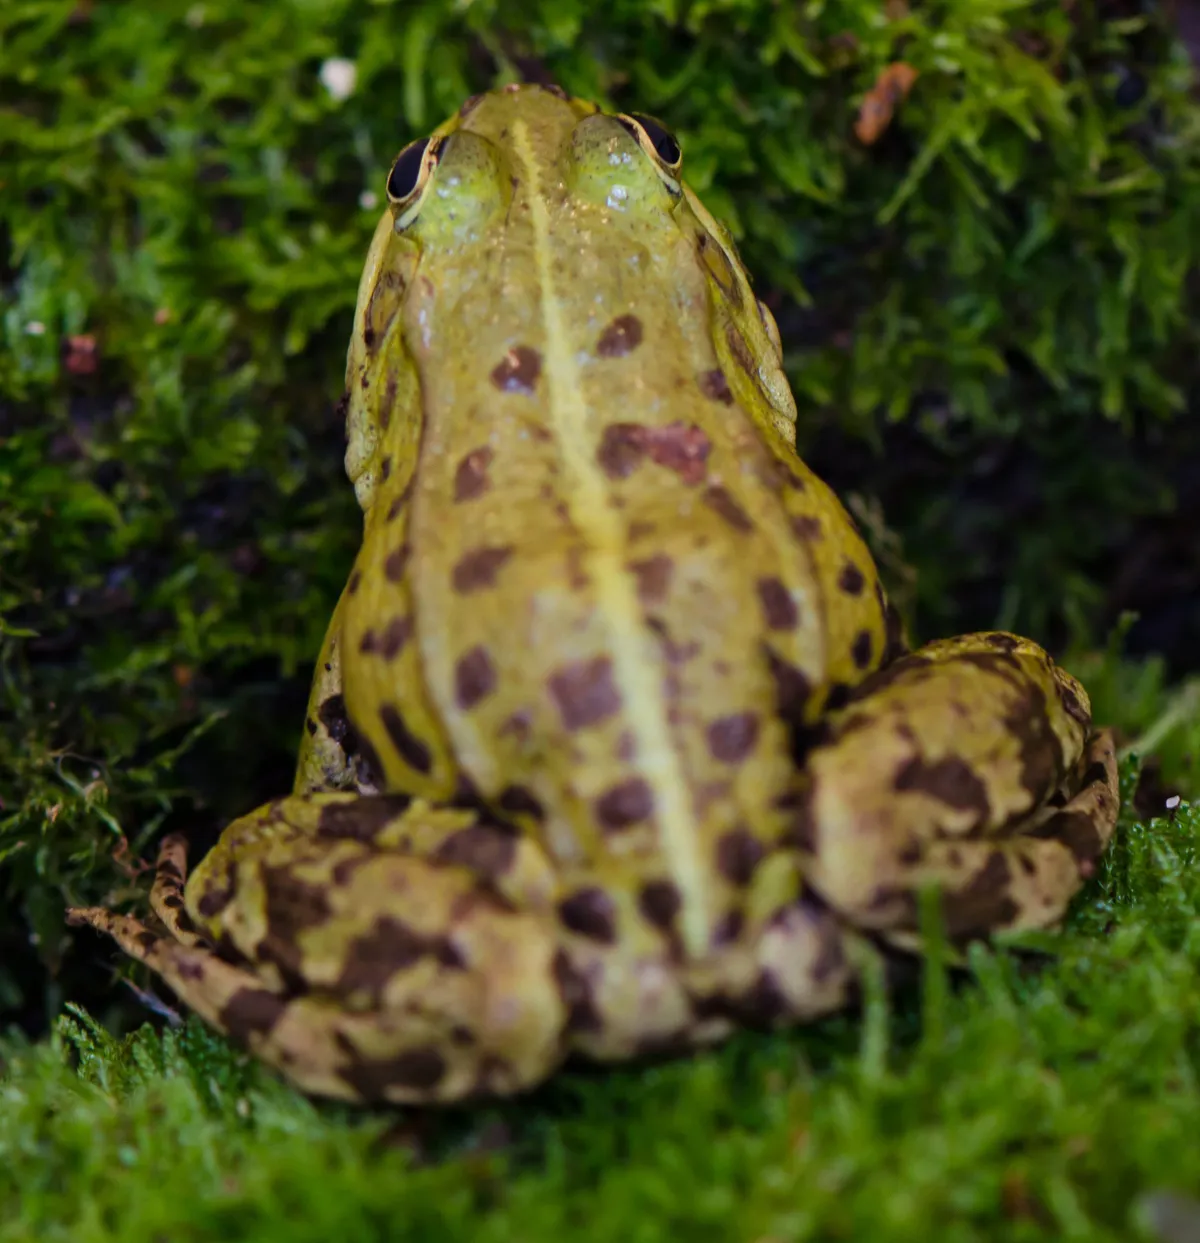 Pool frog, showing the yellow-green stripe down the back. Chris Dresh